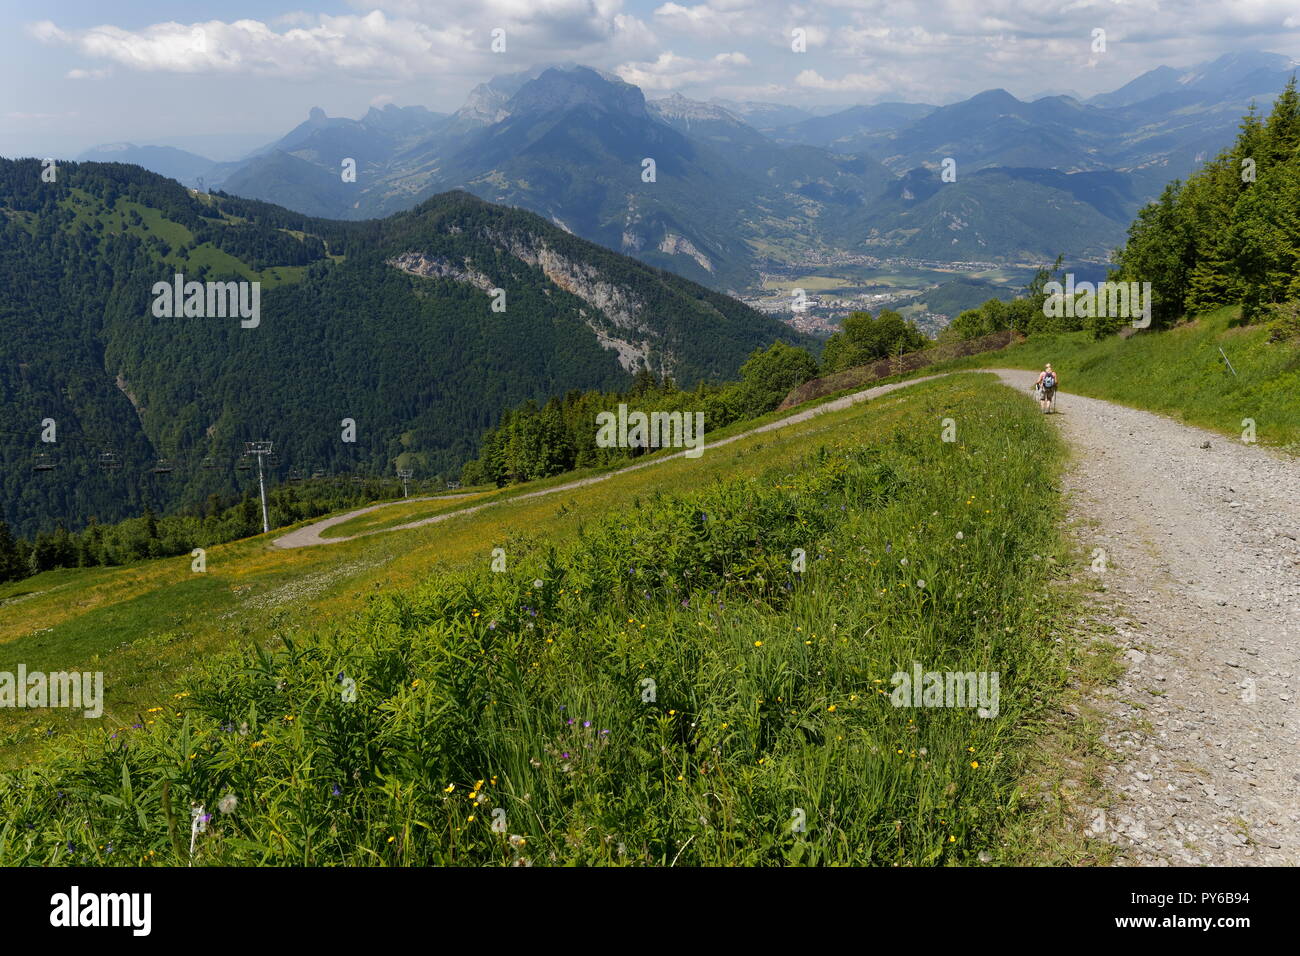 Female hiker on one of the trails with a view towards Faverges and distant mountains La Sambuy mountain area near Faverges France Stock Photo